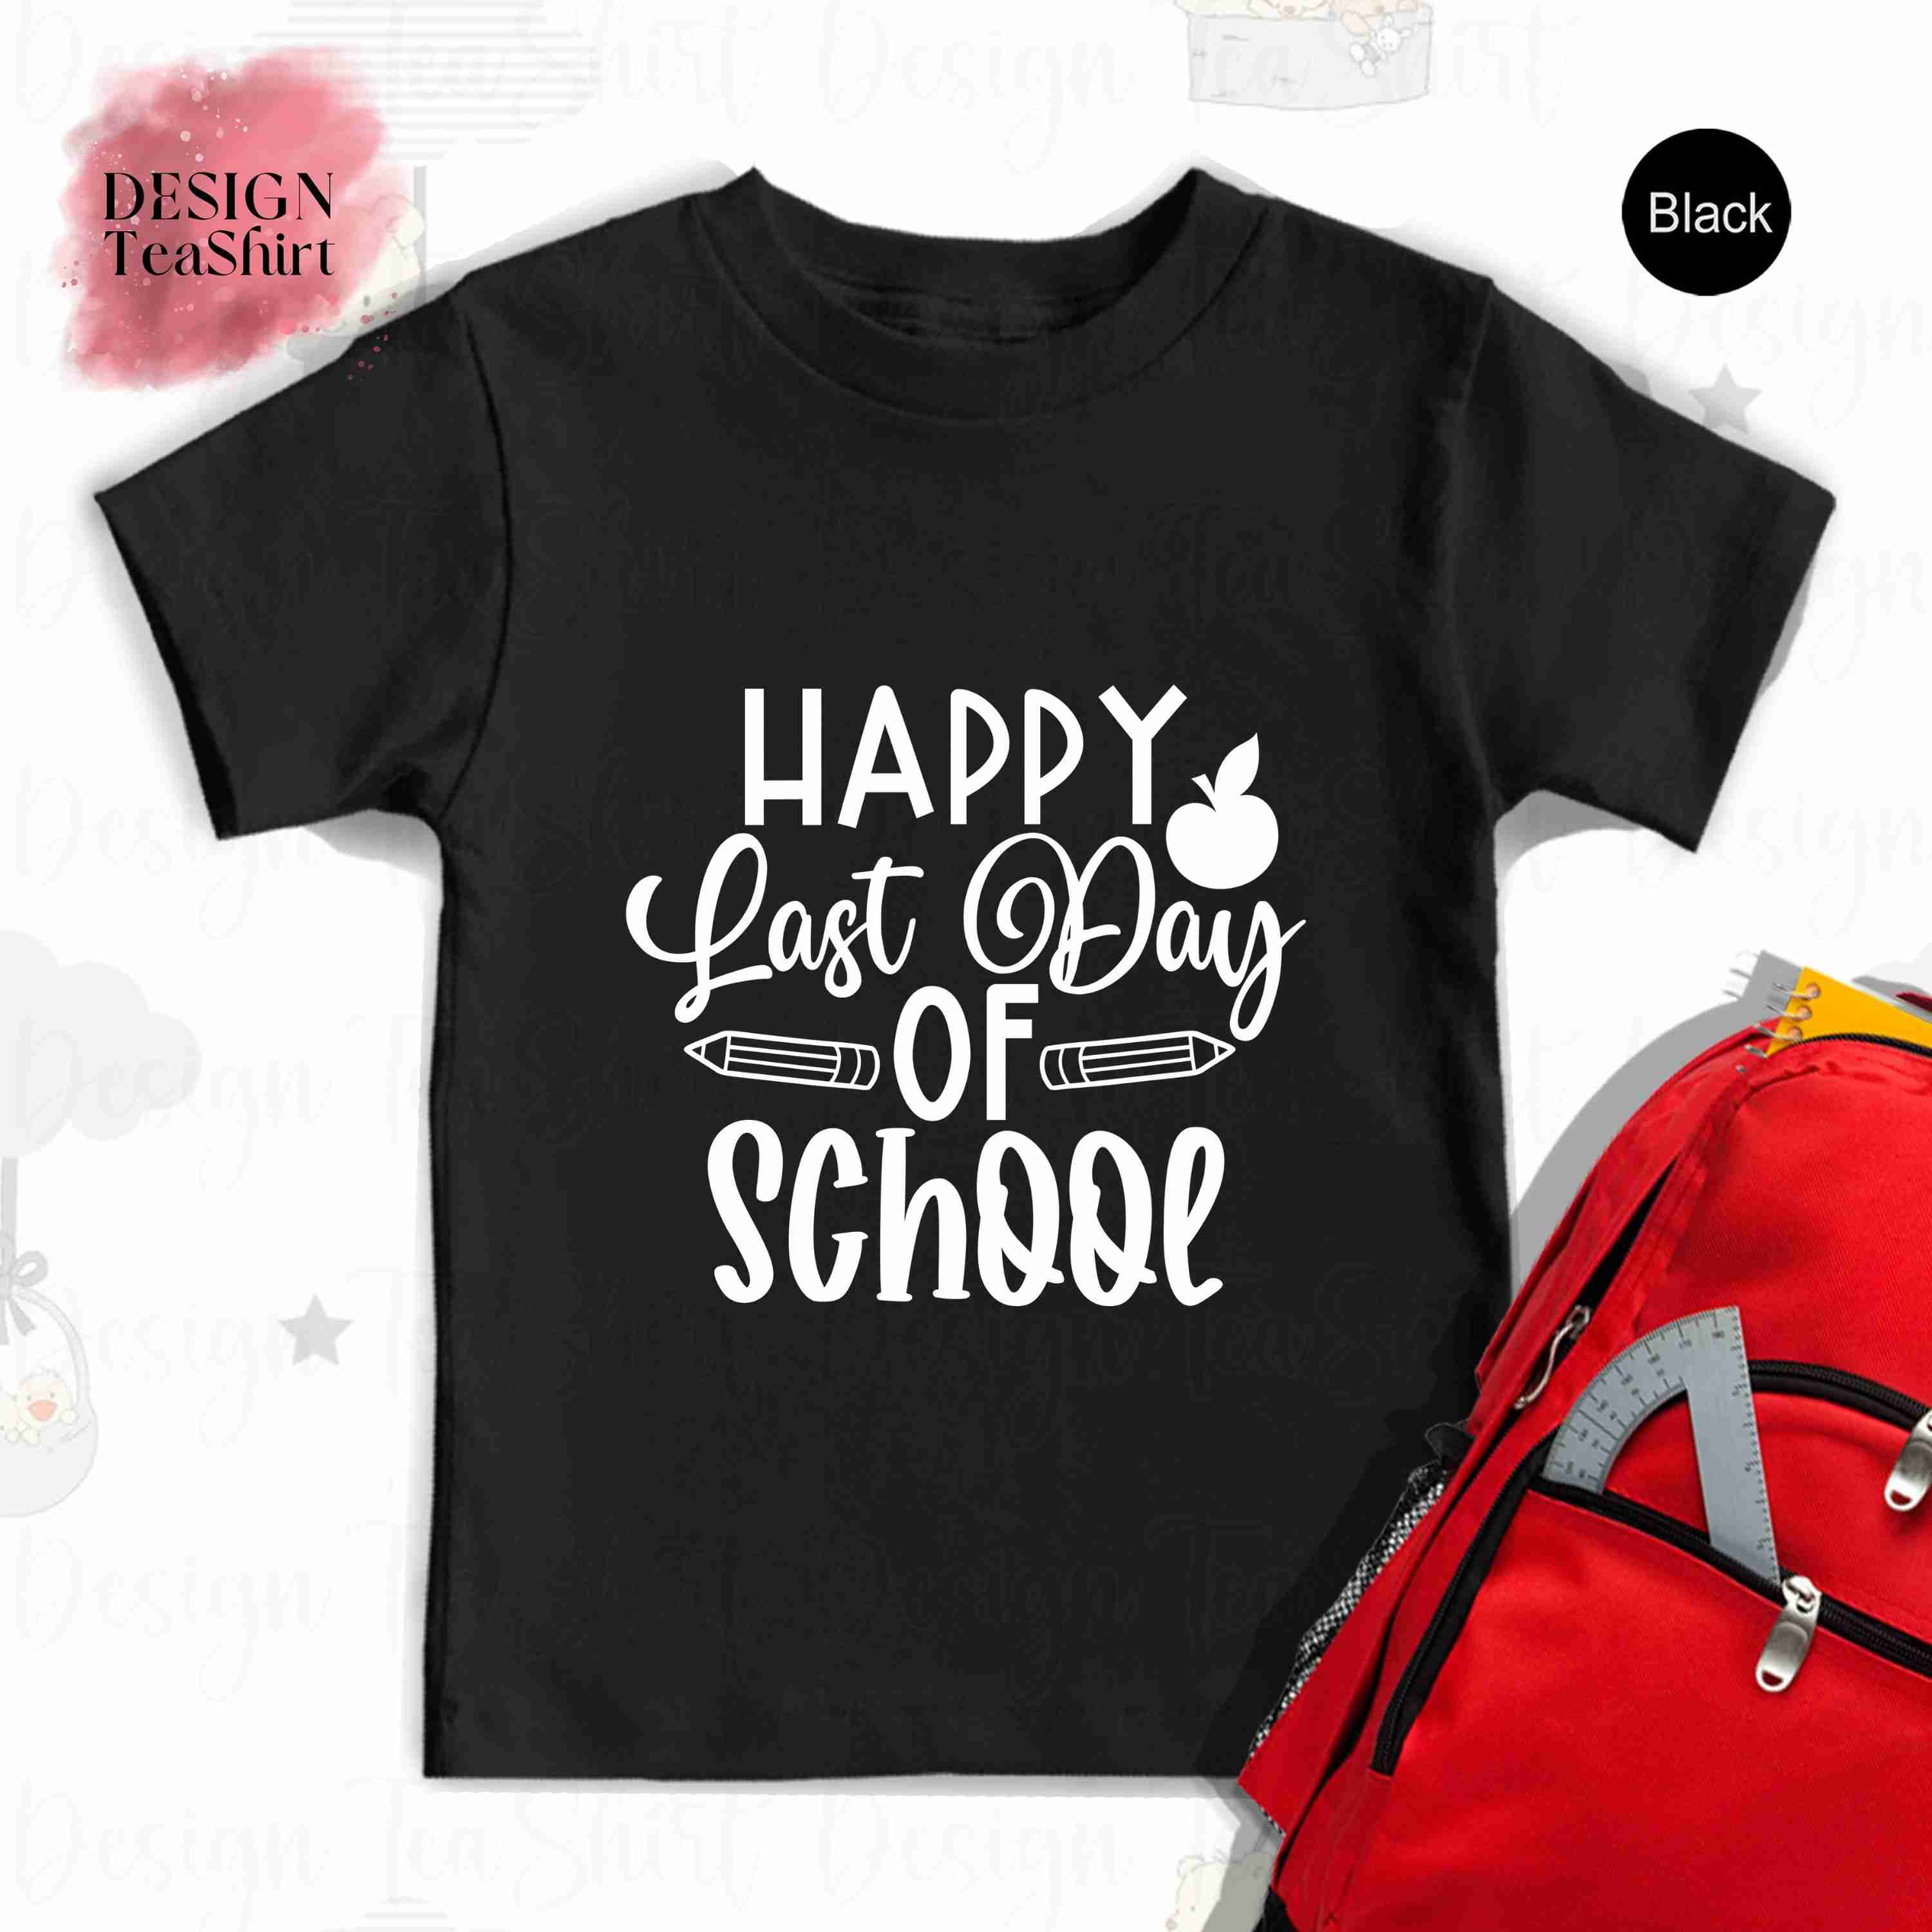 last-day-of-school-shirt-happy-last-day-shirt with discount code